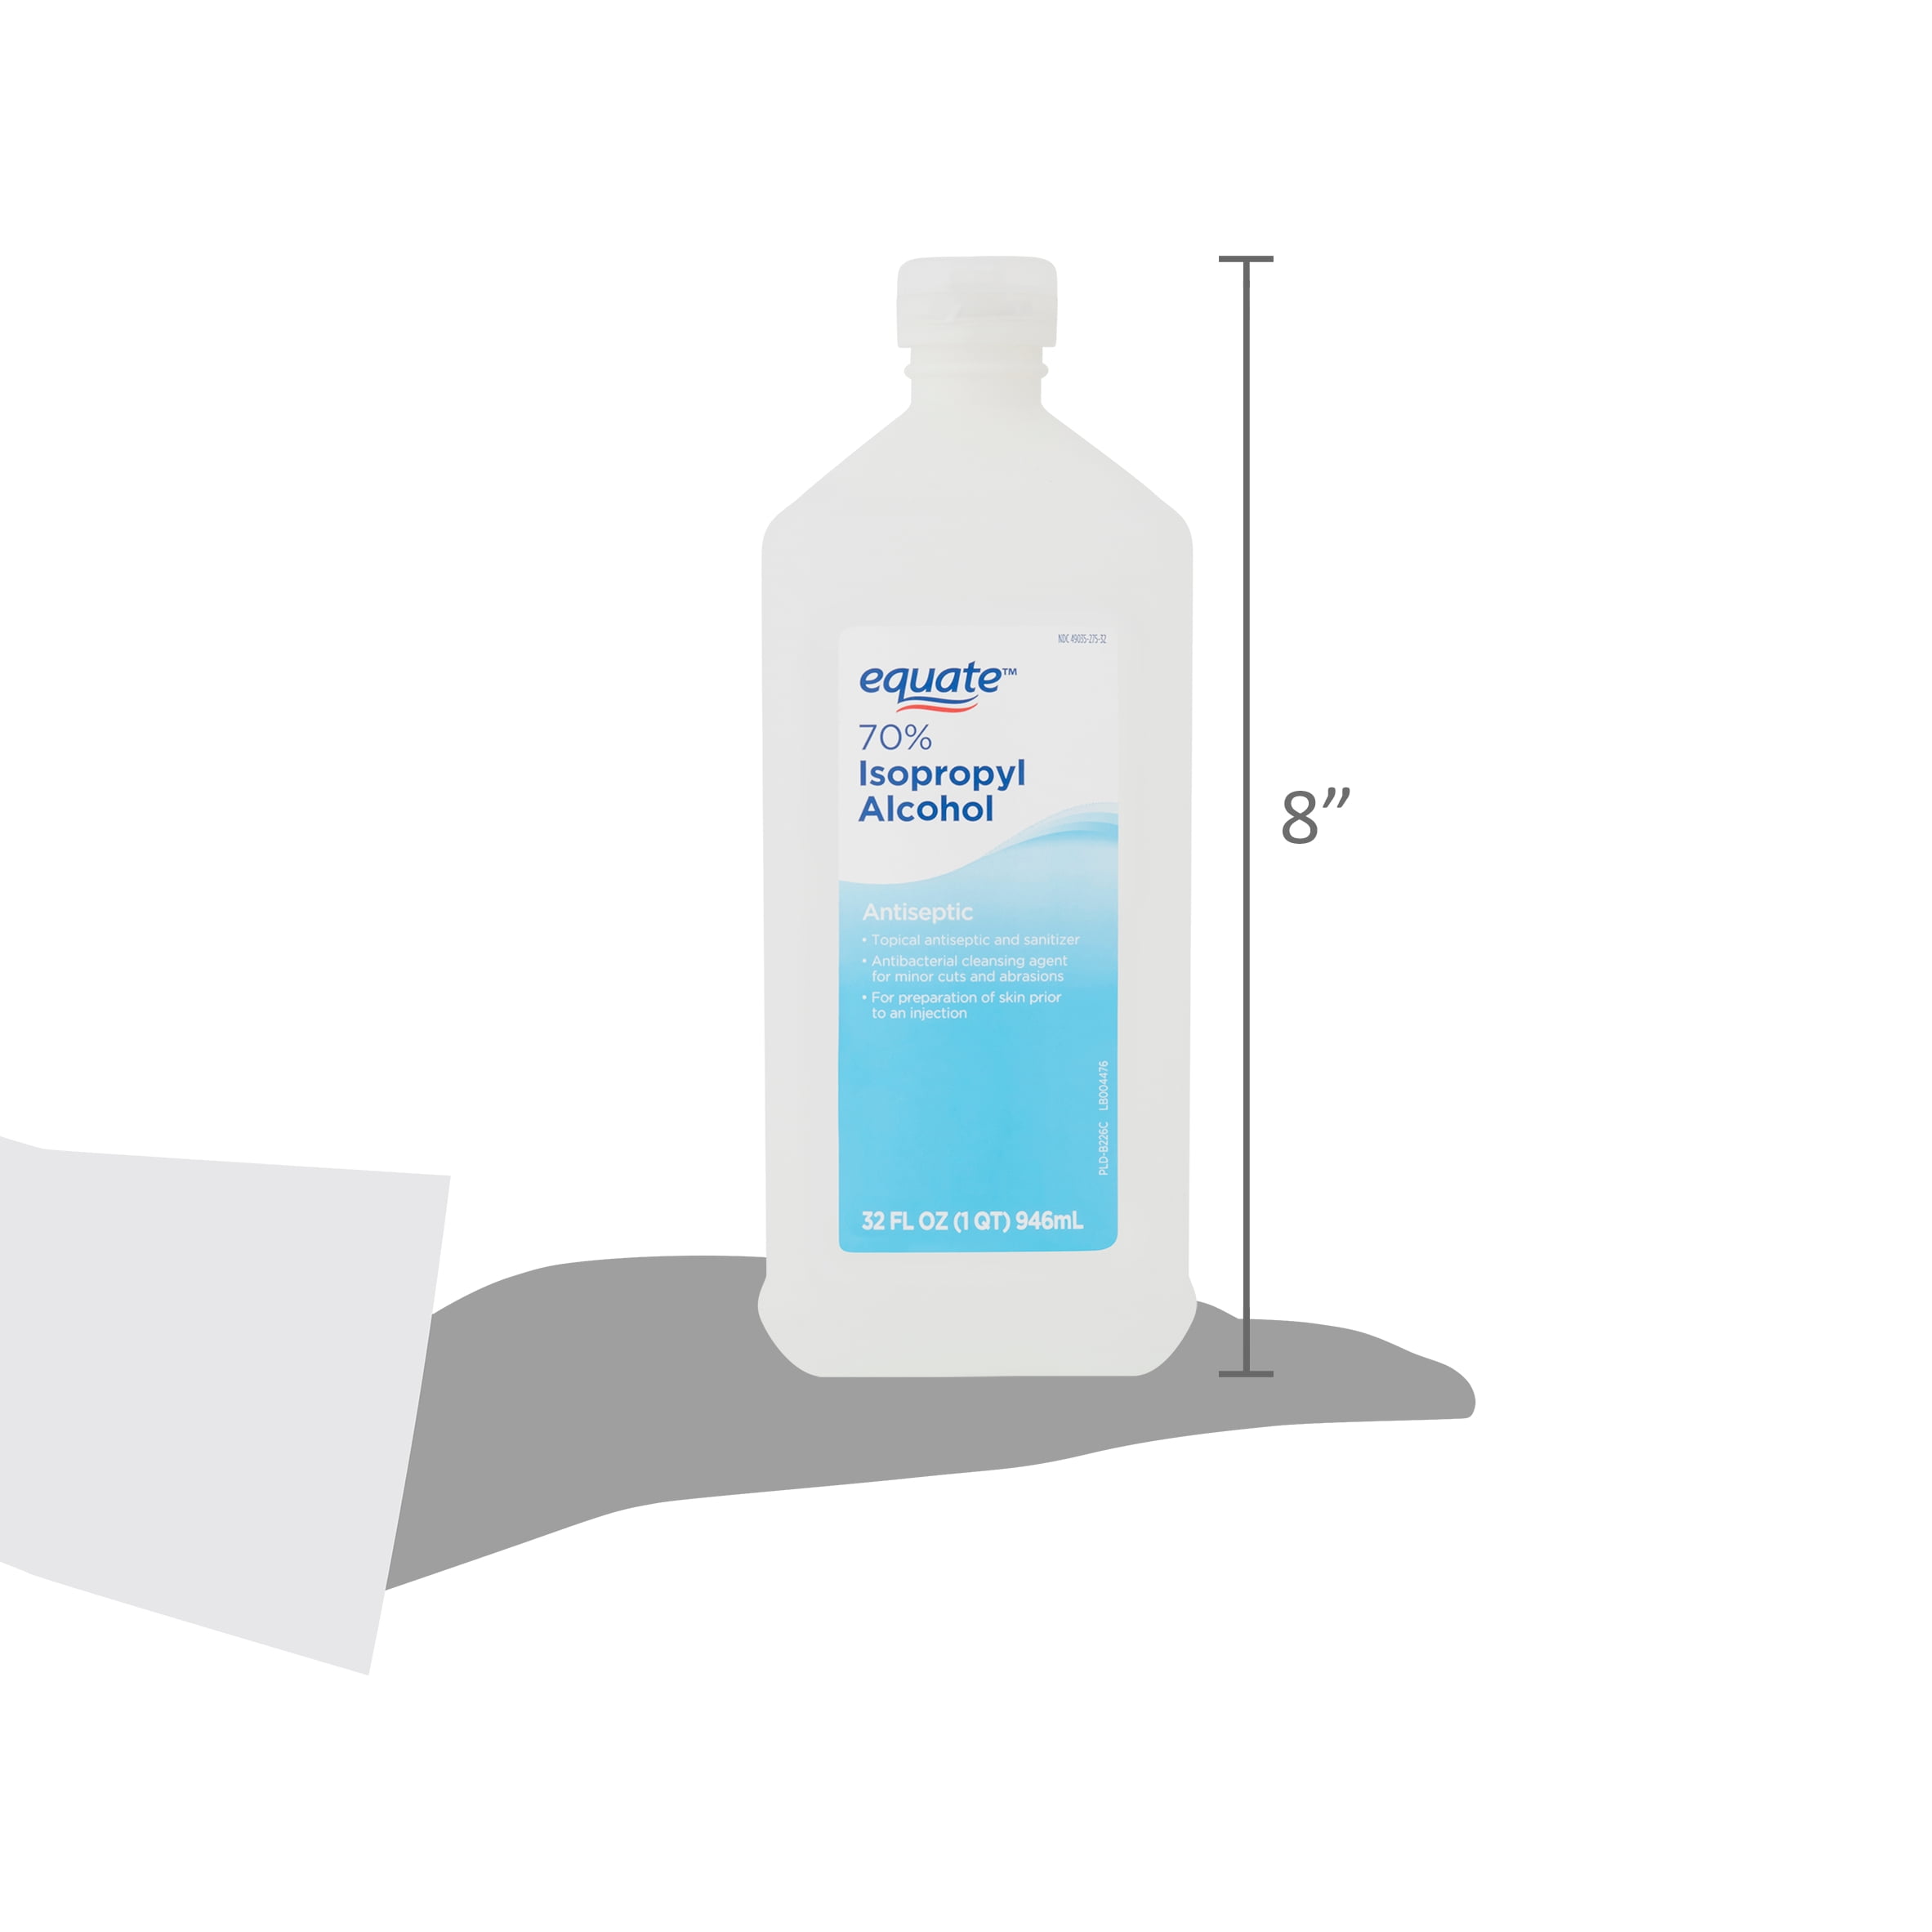 Hexeal RUBBING ALCOHOL 70% | 1L | Lab Grade | Isopropyl Alcohol/Isopropanol